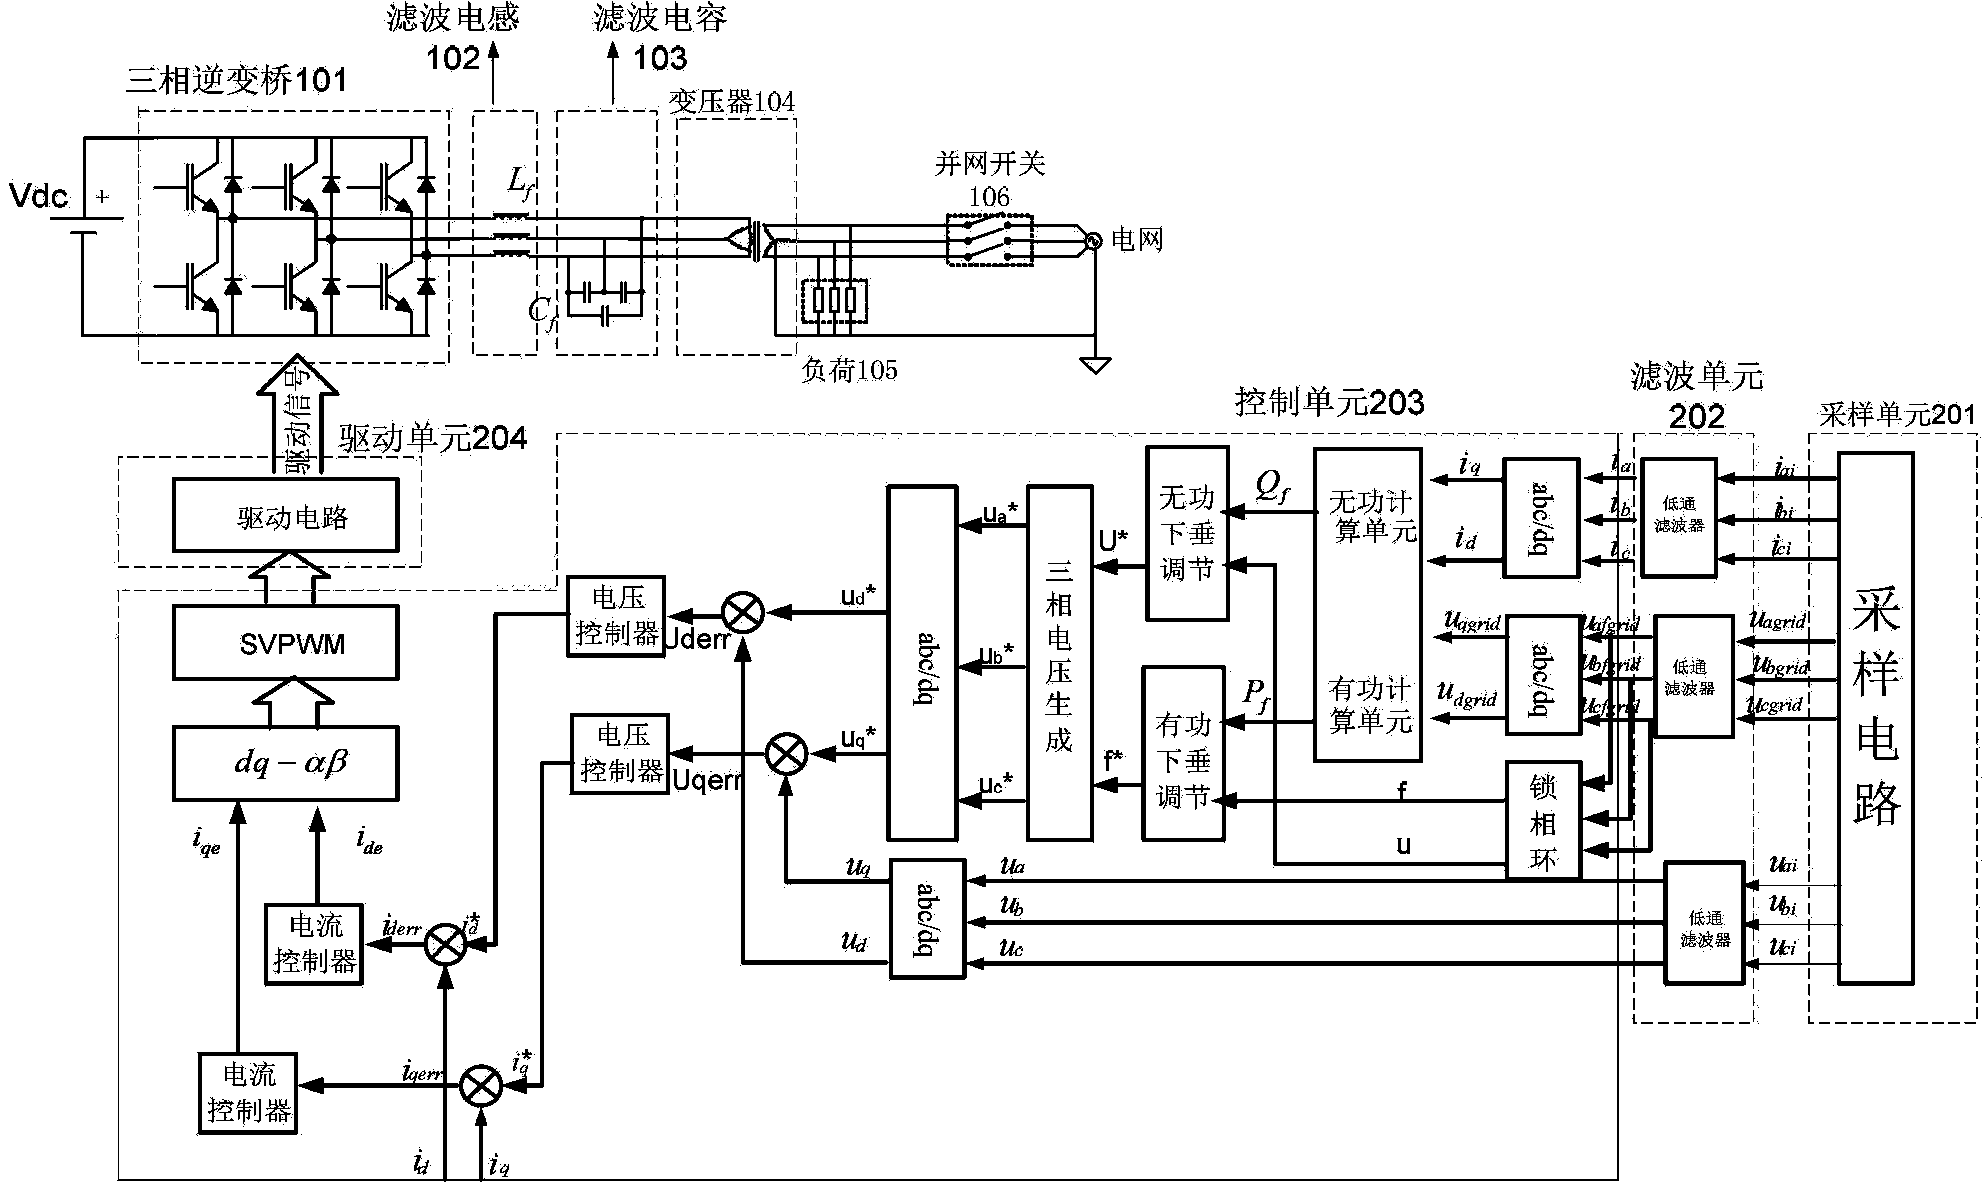 Droop control-based smooth switching method